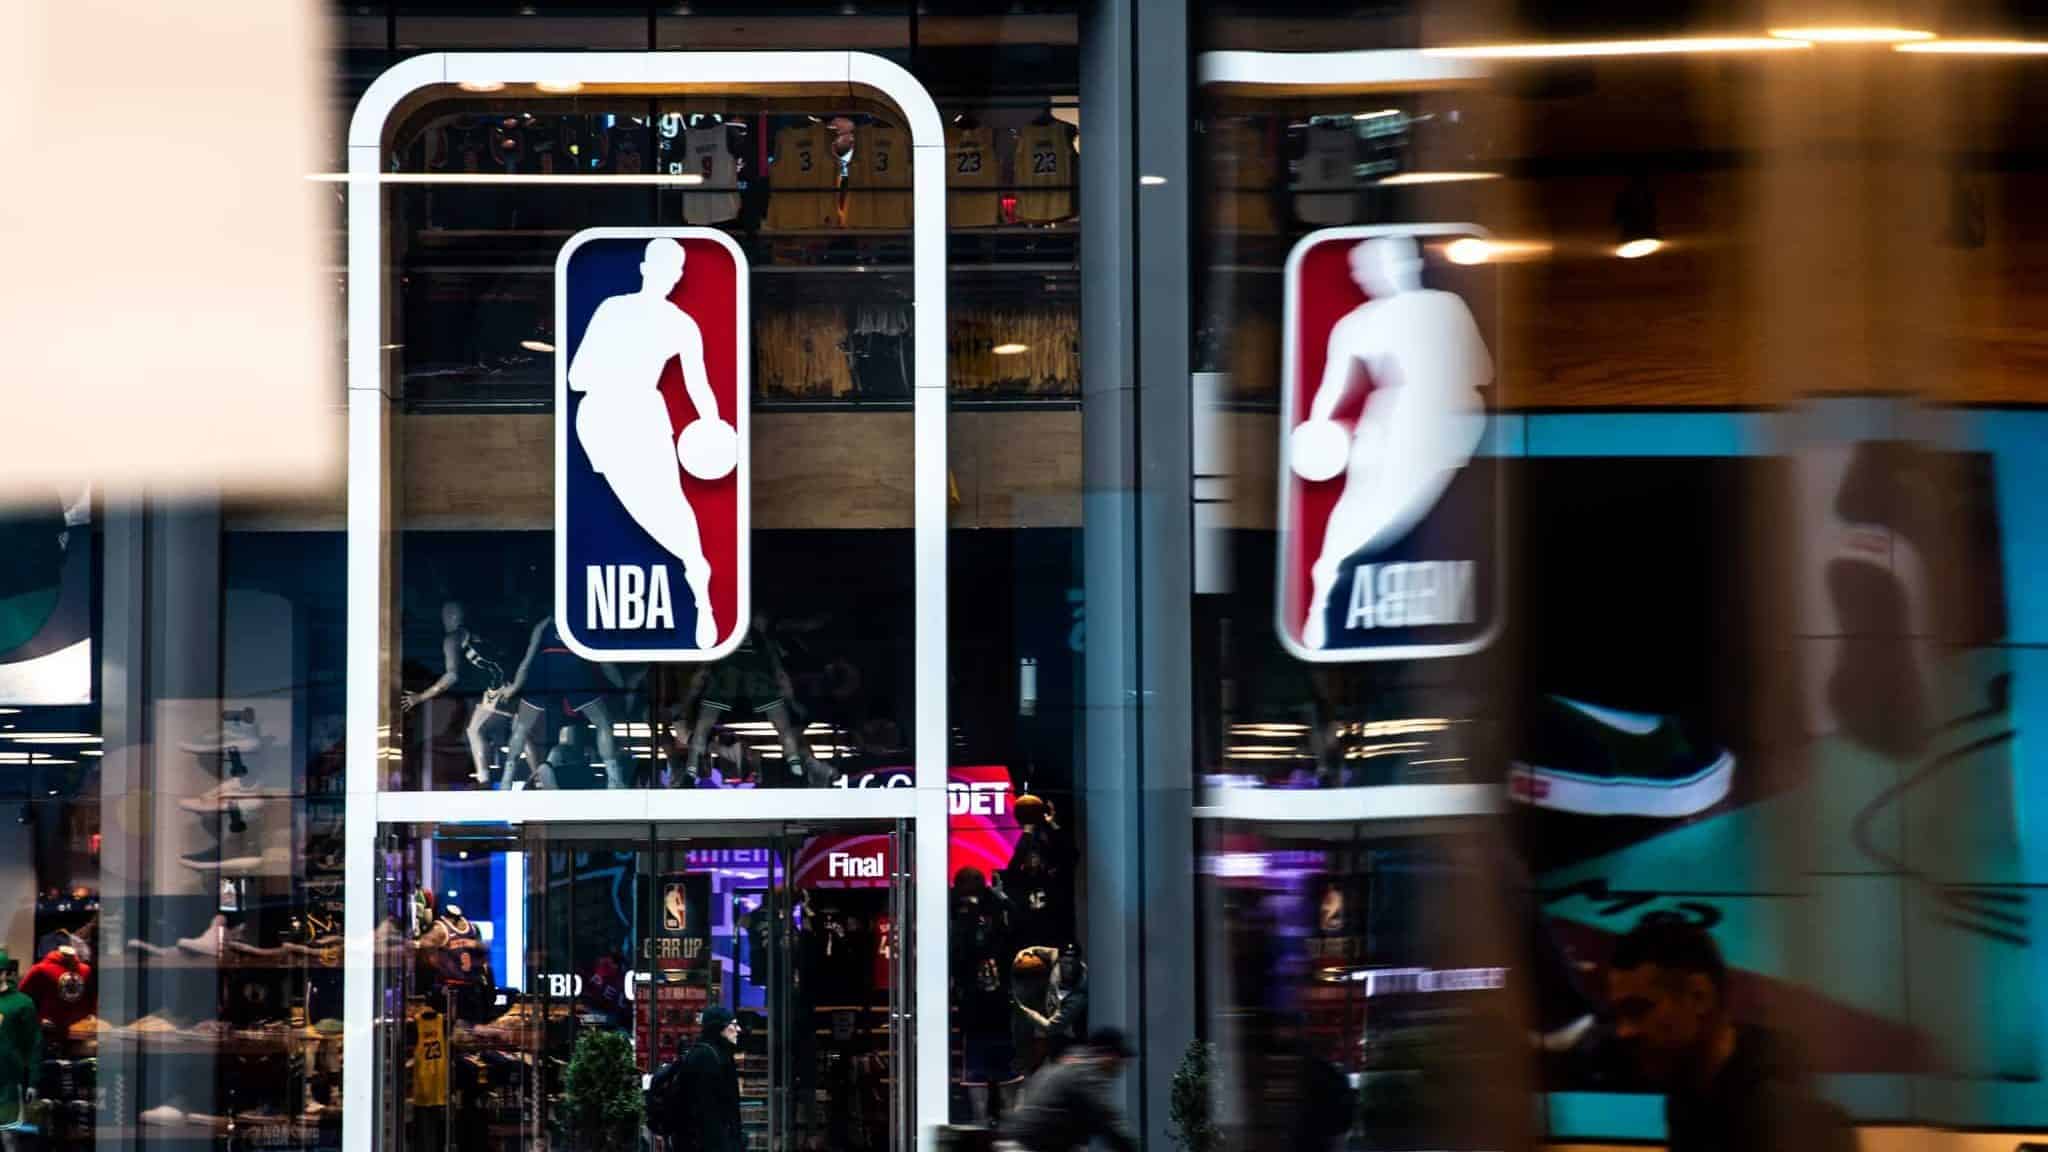 NEW YORK, NY - MARCH 12: An NBA logo is shown at the 5th Avenue NBA store on March 12, 2020 in New York City. The National Basketball Association said they would suspend all games after player Rudy Gobert of the Utah Jazz reportedly tested positive for the Coronavirus (COVID-19).